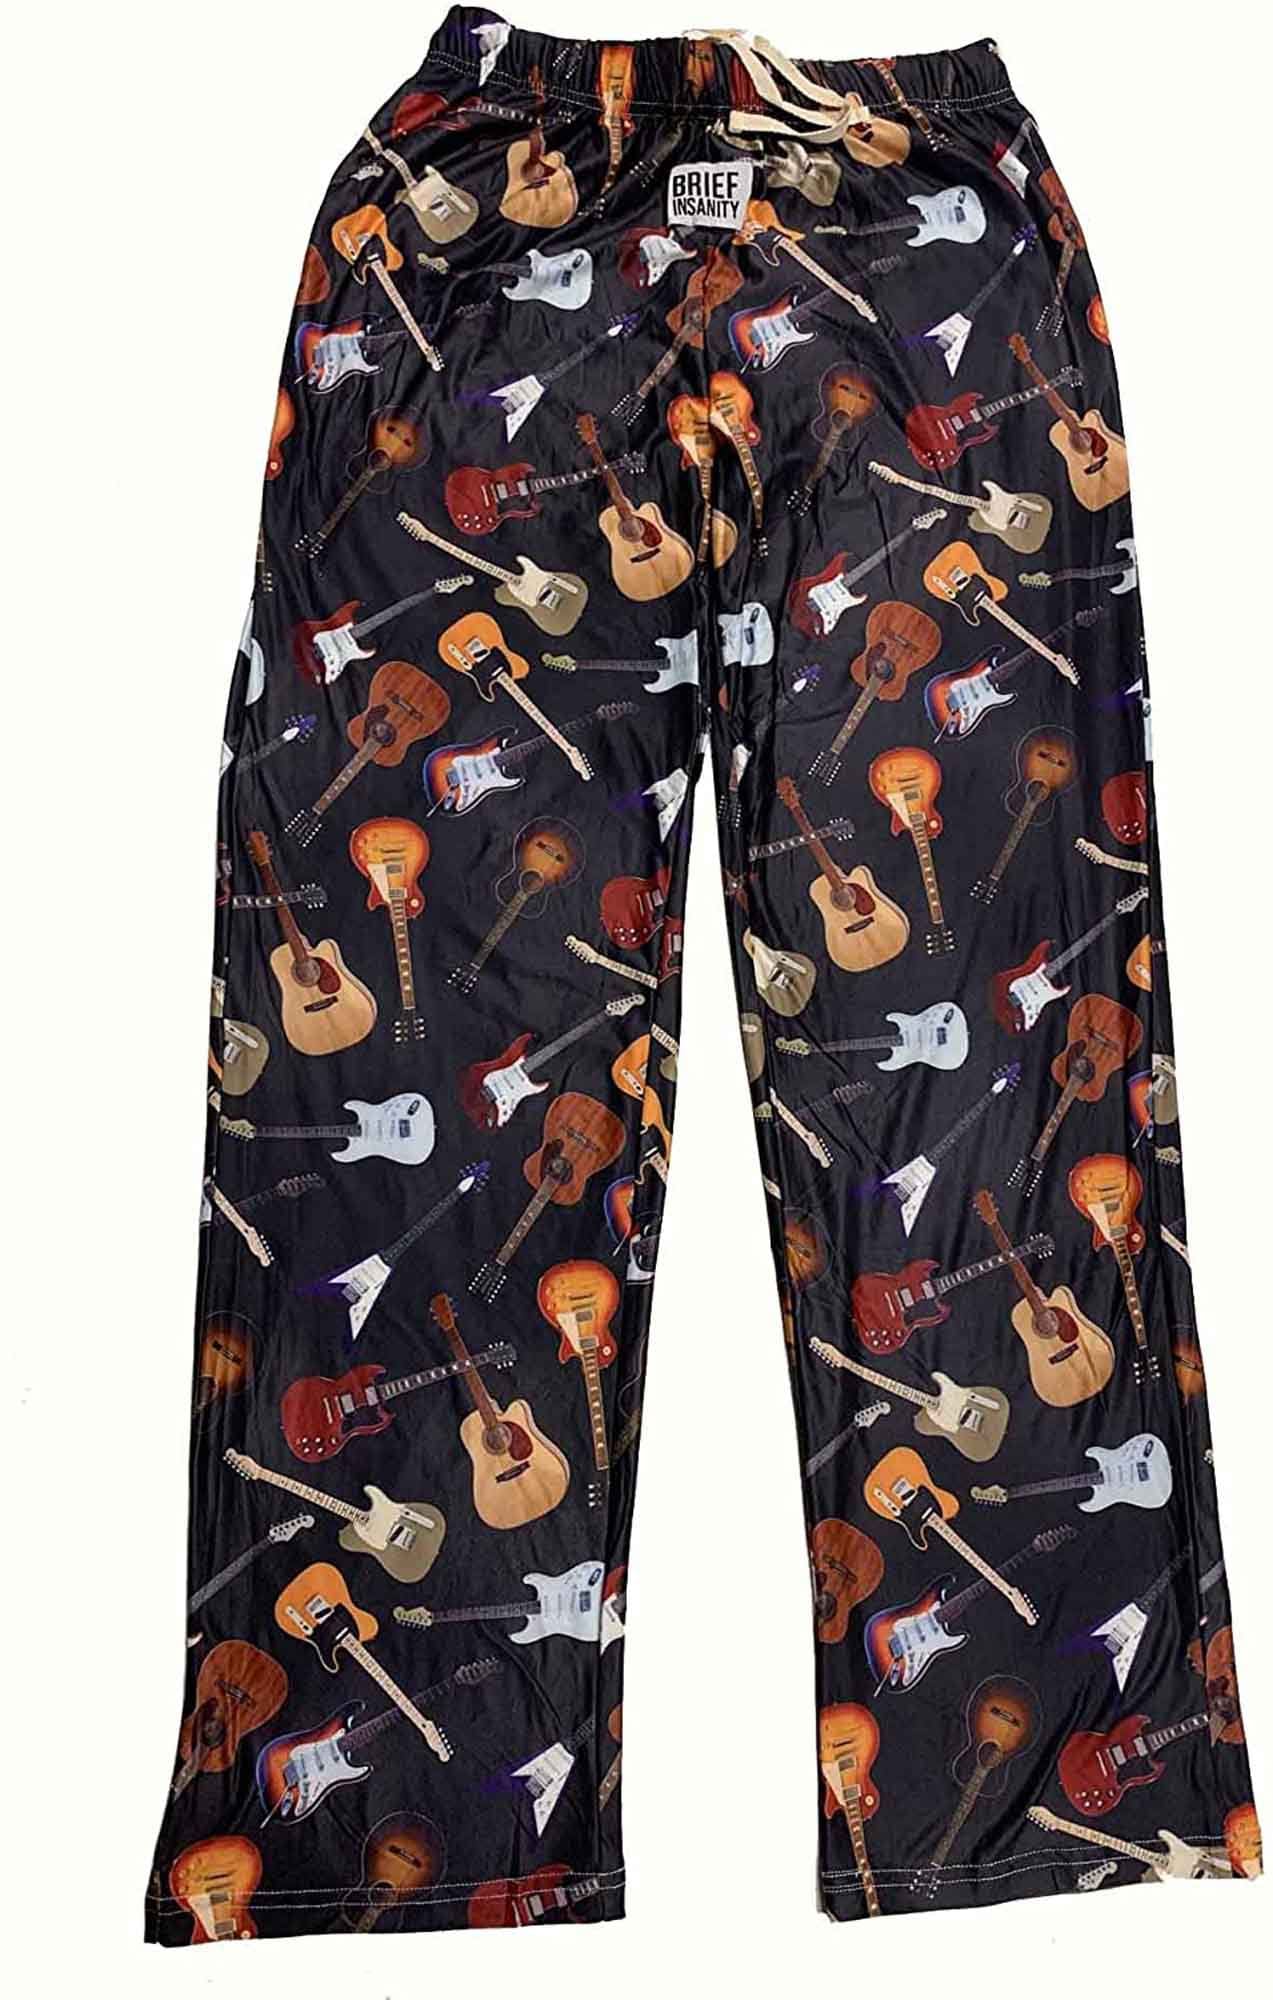 Brief Insanity Unisex All Over Guitars lounge pants